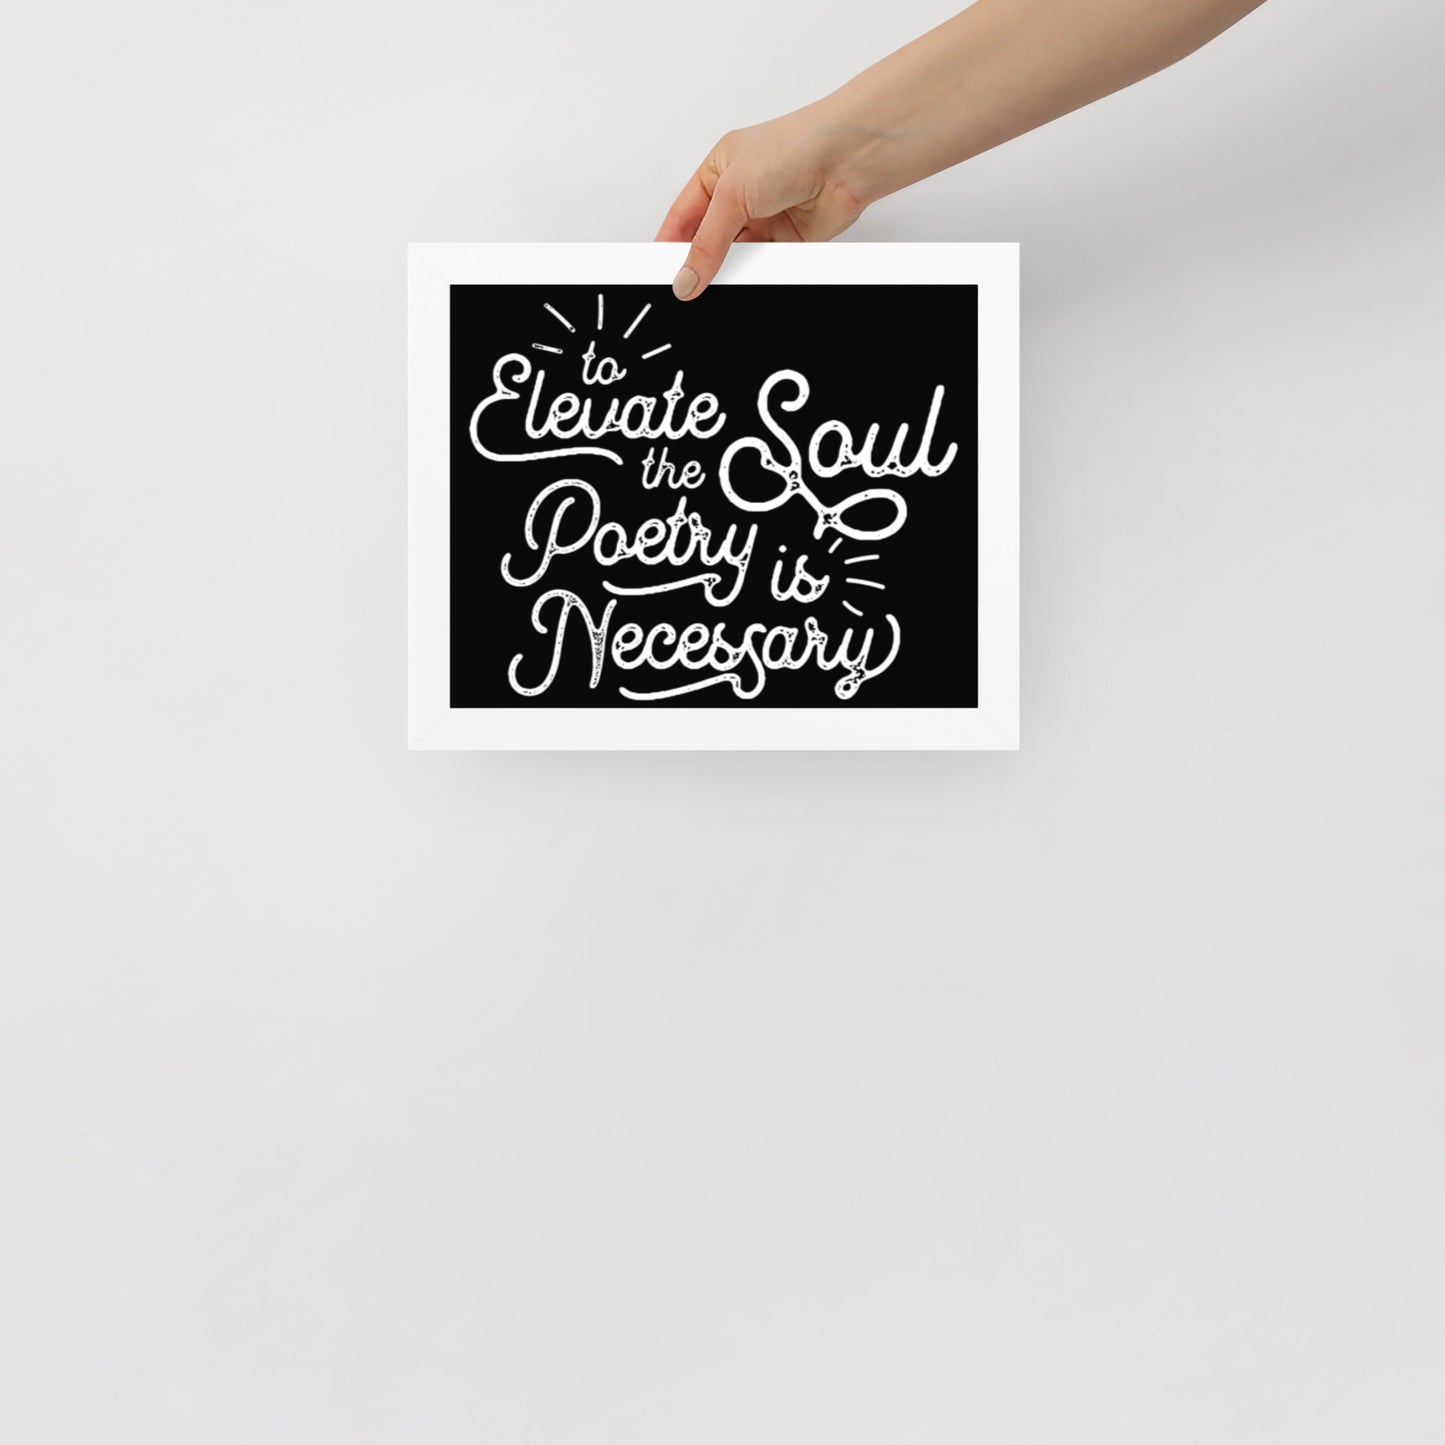 To Elevate the Soul Poetry is Necessary Framed Poster - 8 x 10 White Frame